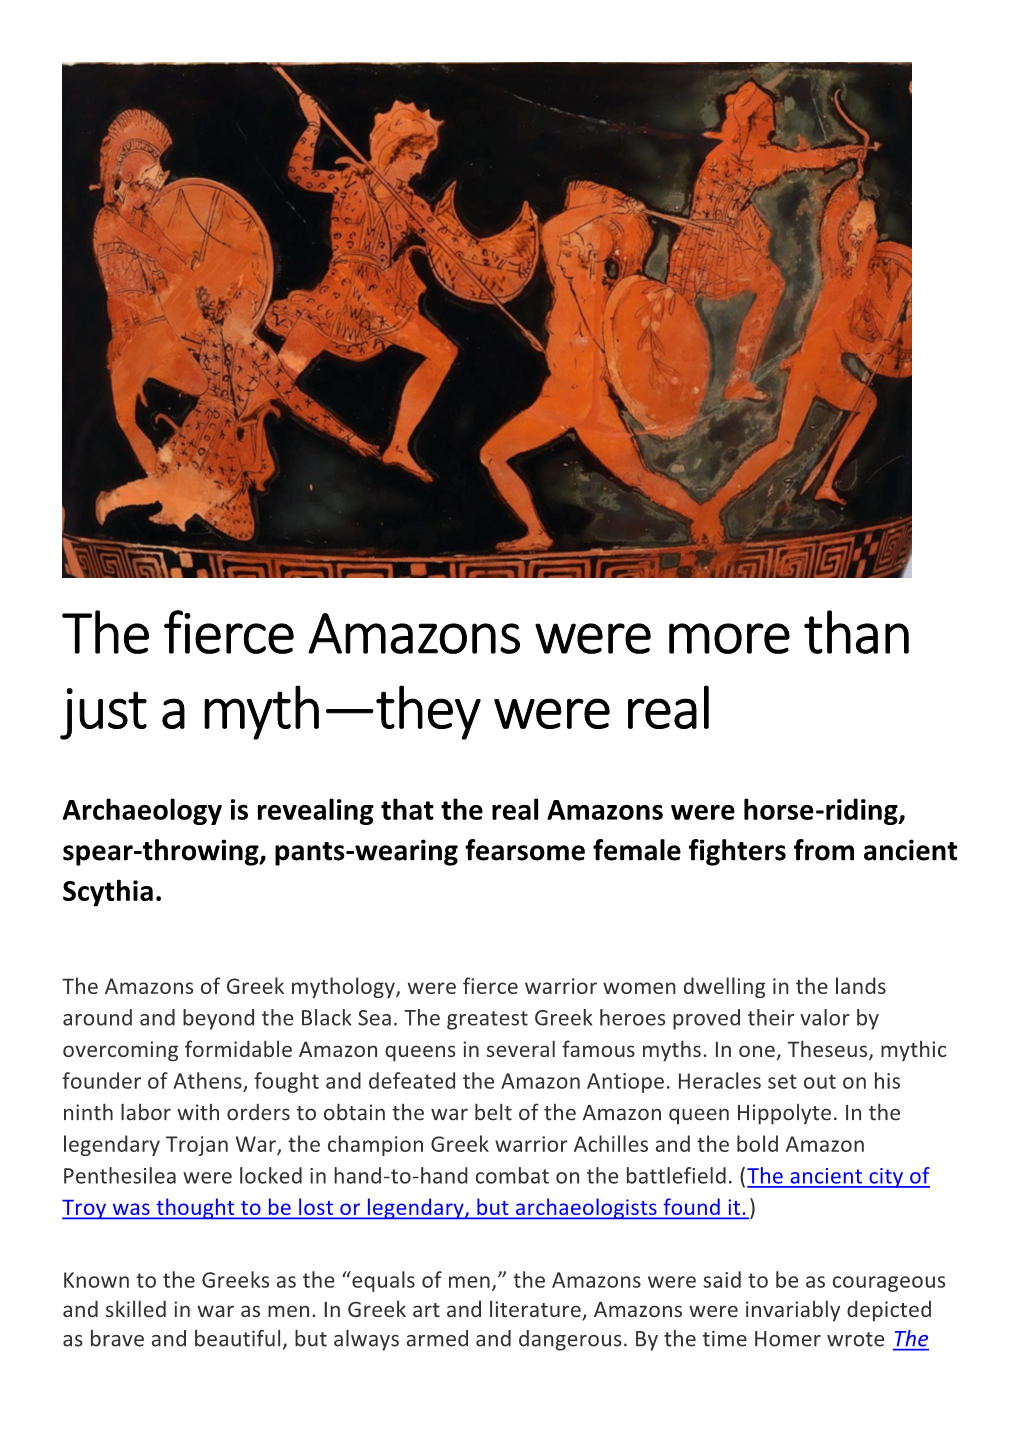 The Fierce Amazons Were More Than Just a Myth—They Were Real